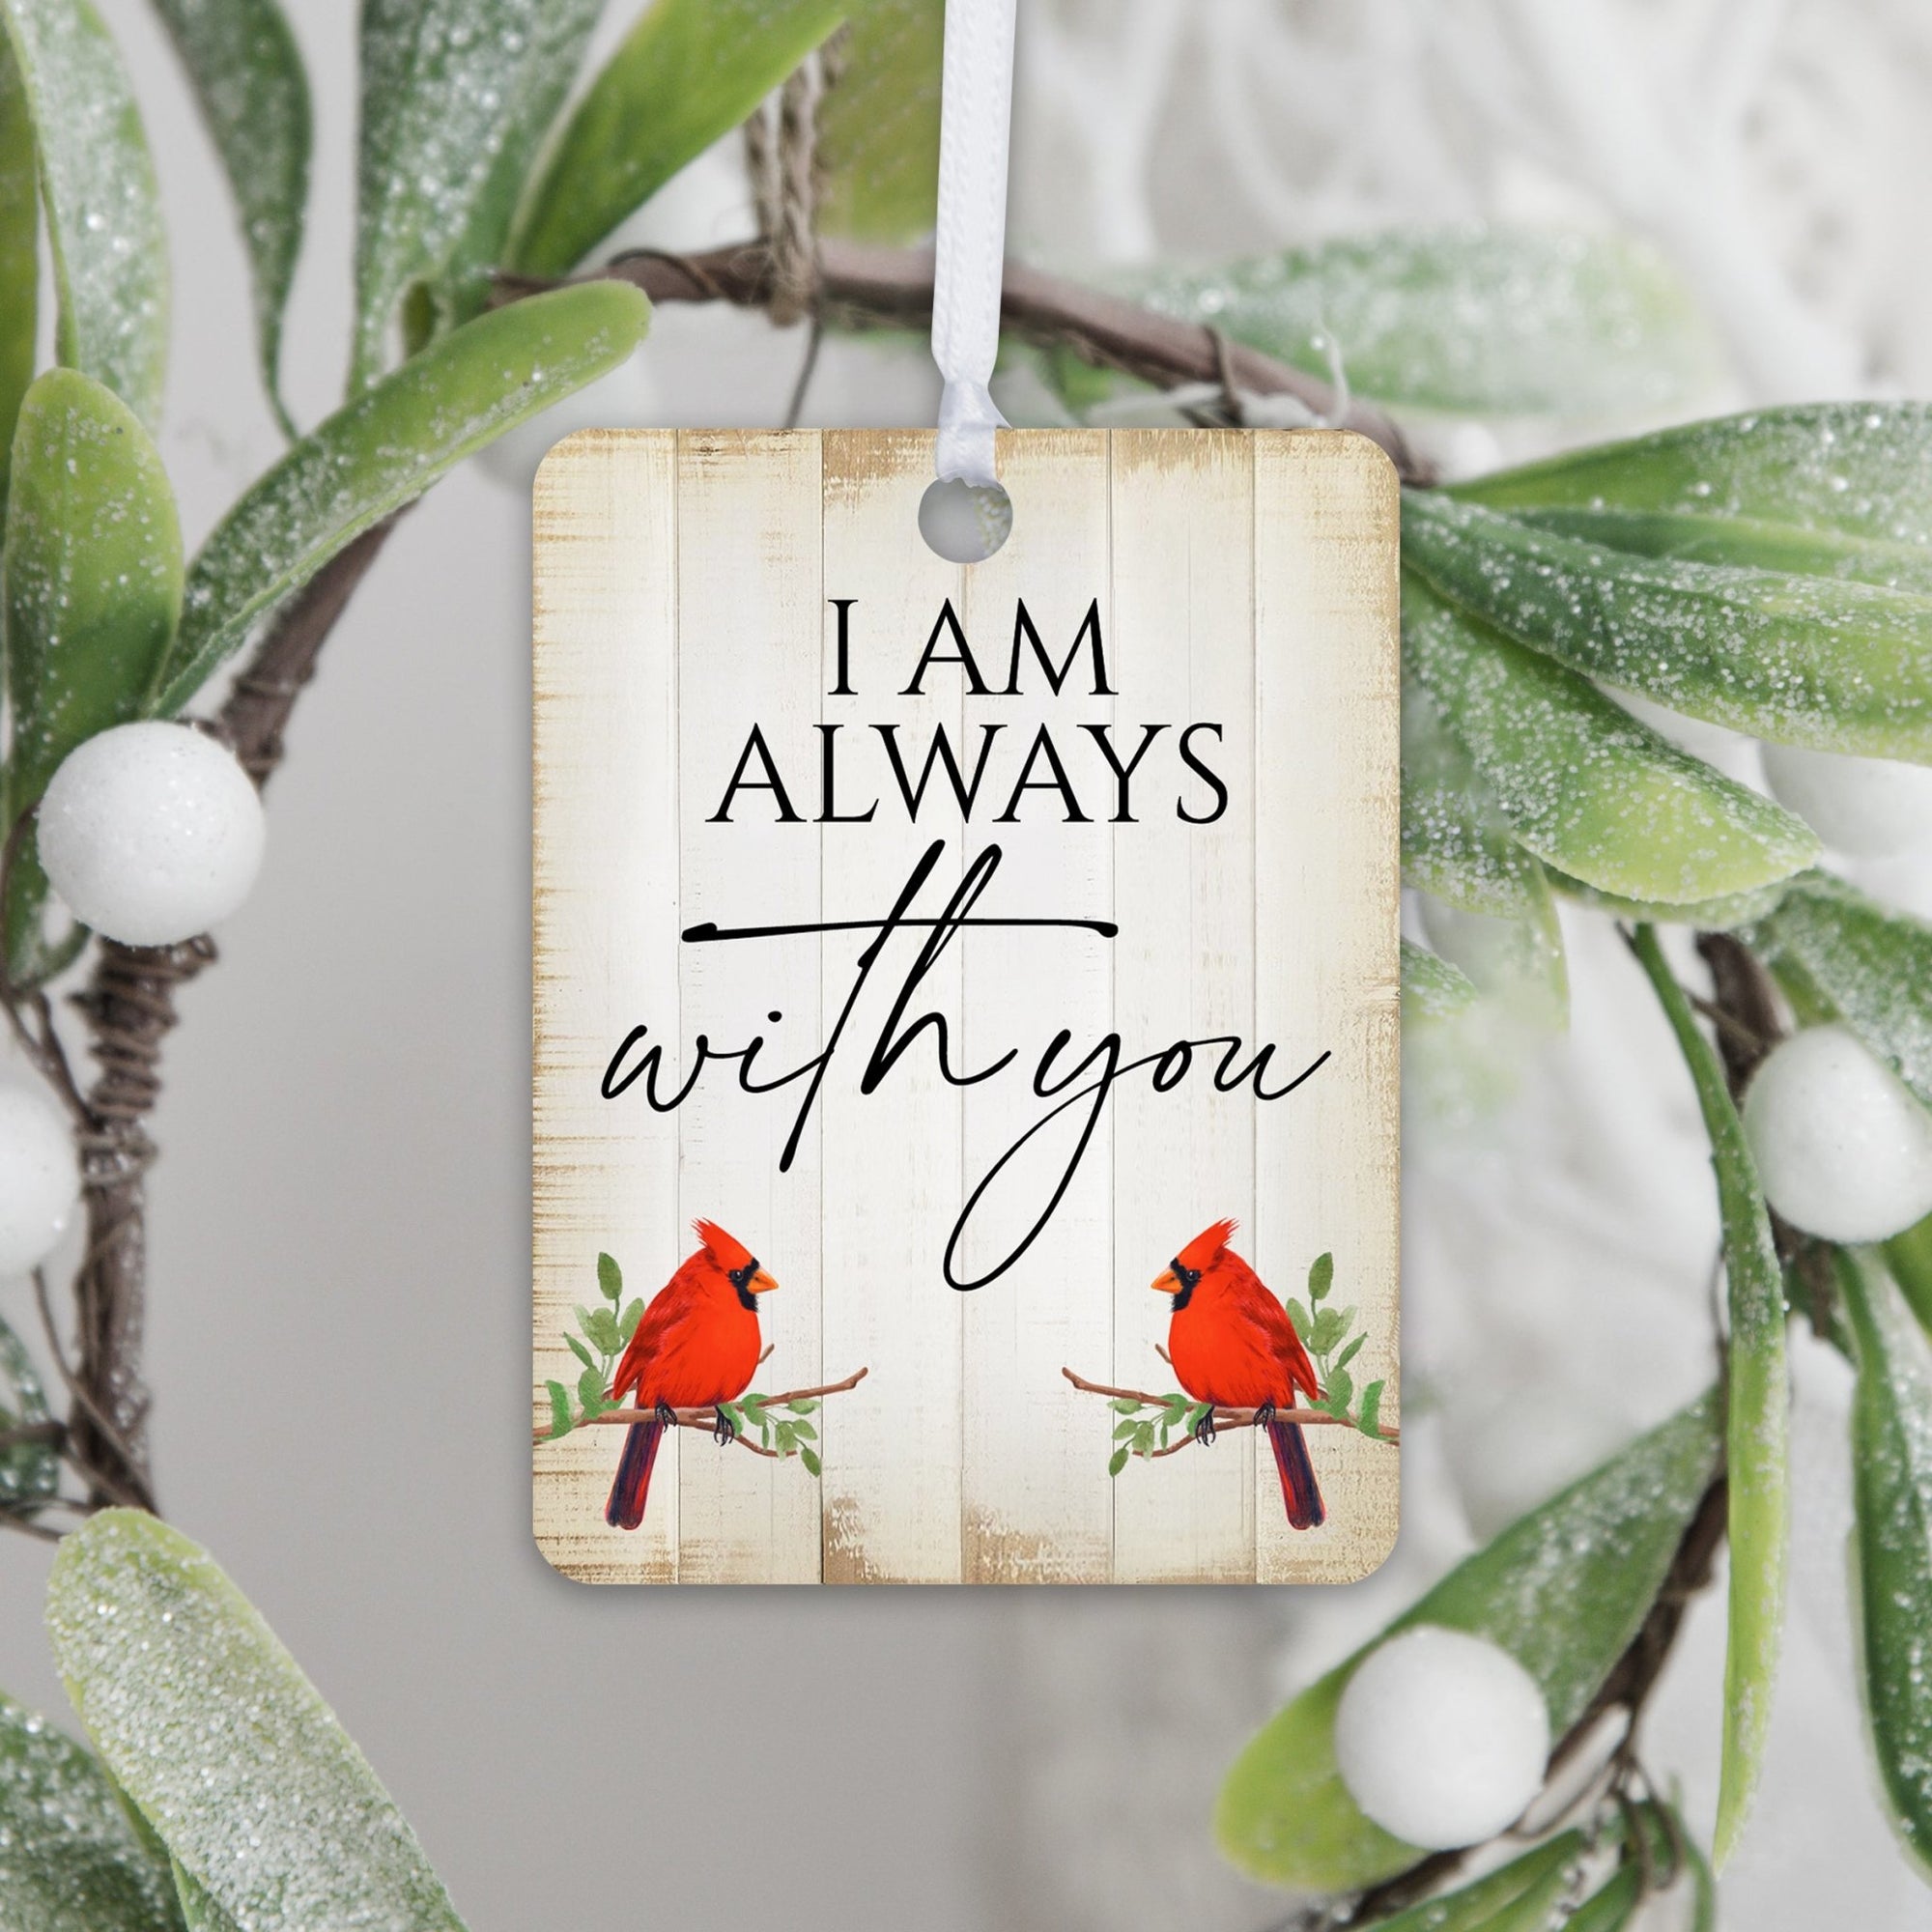 Elegant Vertical Cardinal Wooden Ornament With Everyday Verses Gift Ideas - I Am Always